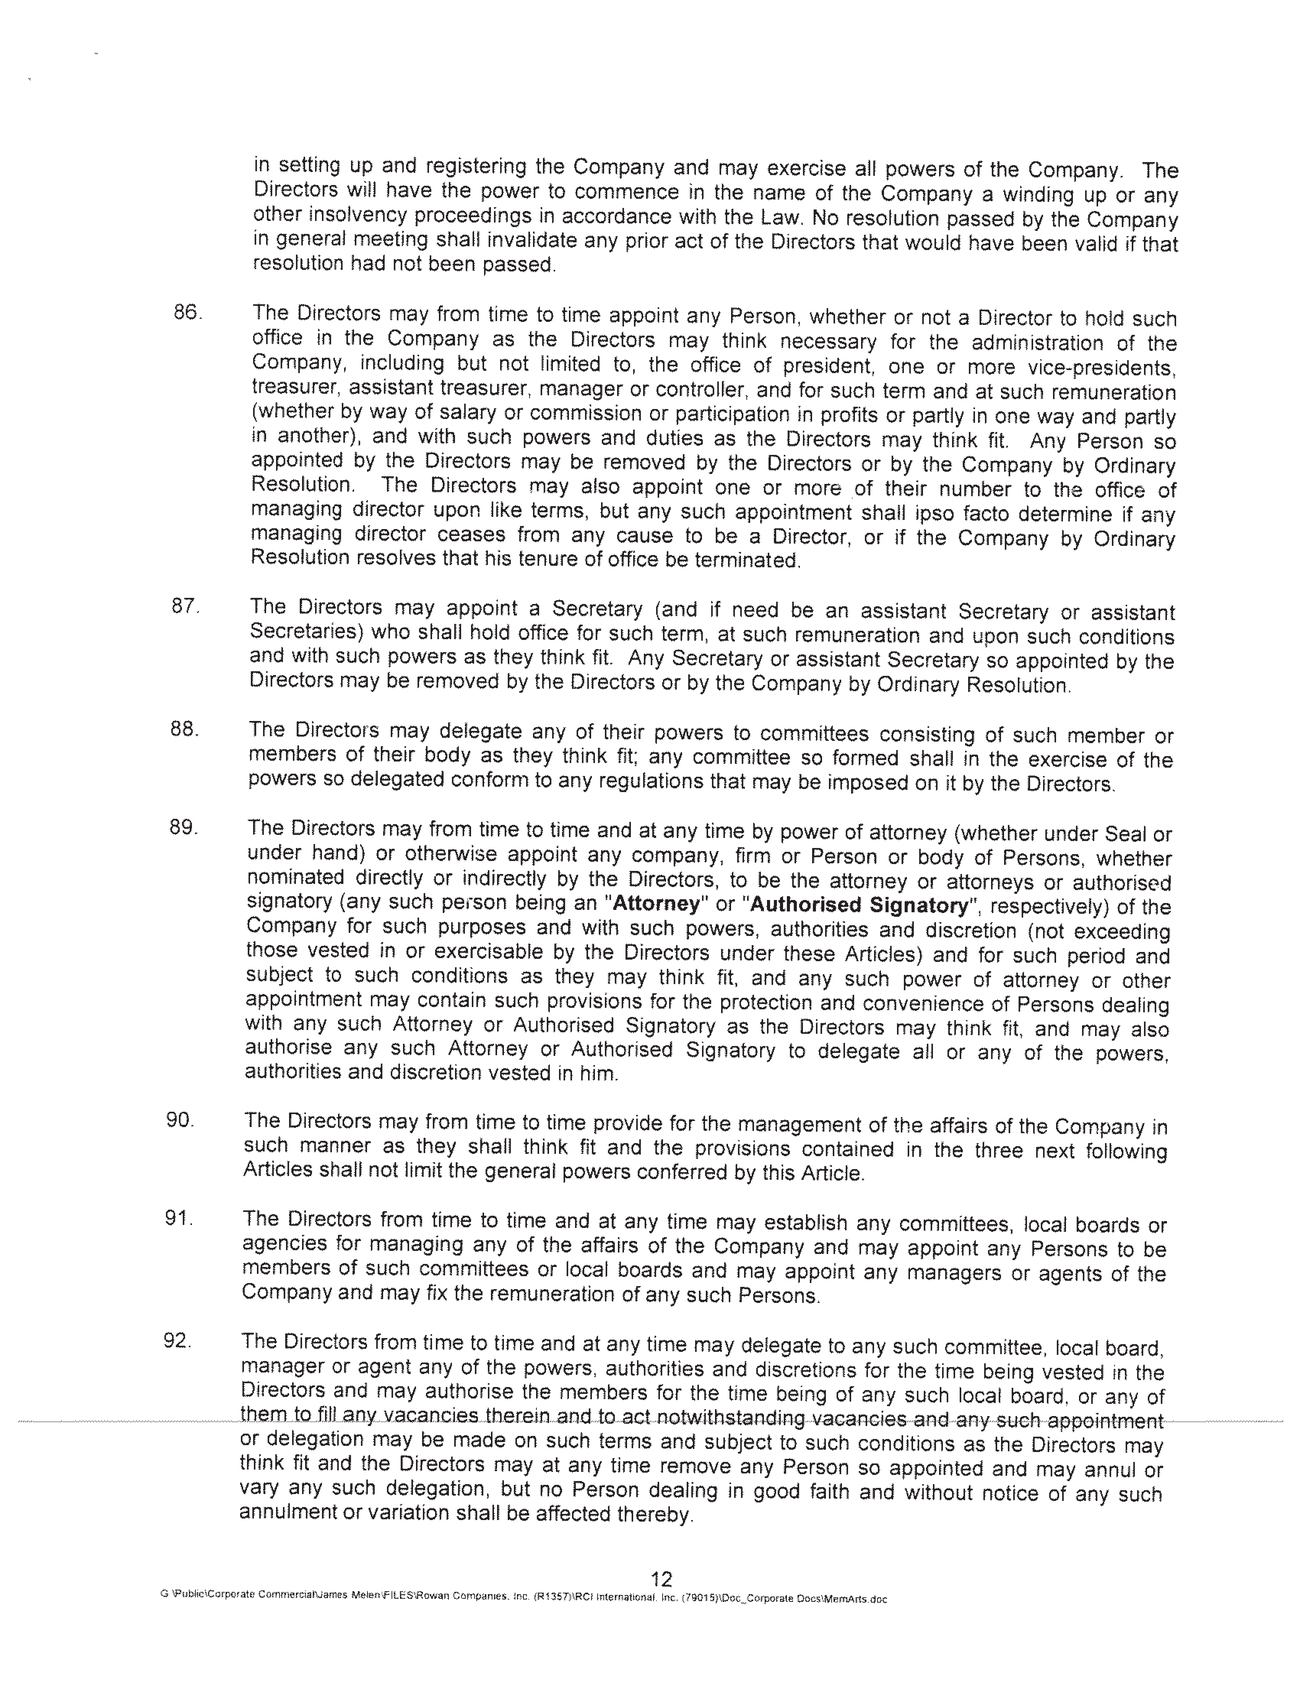 New Microsoft Word Document - Copy_page003page020page001 memorandum and articles of association of rci international inc_page017.jpg